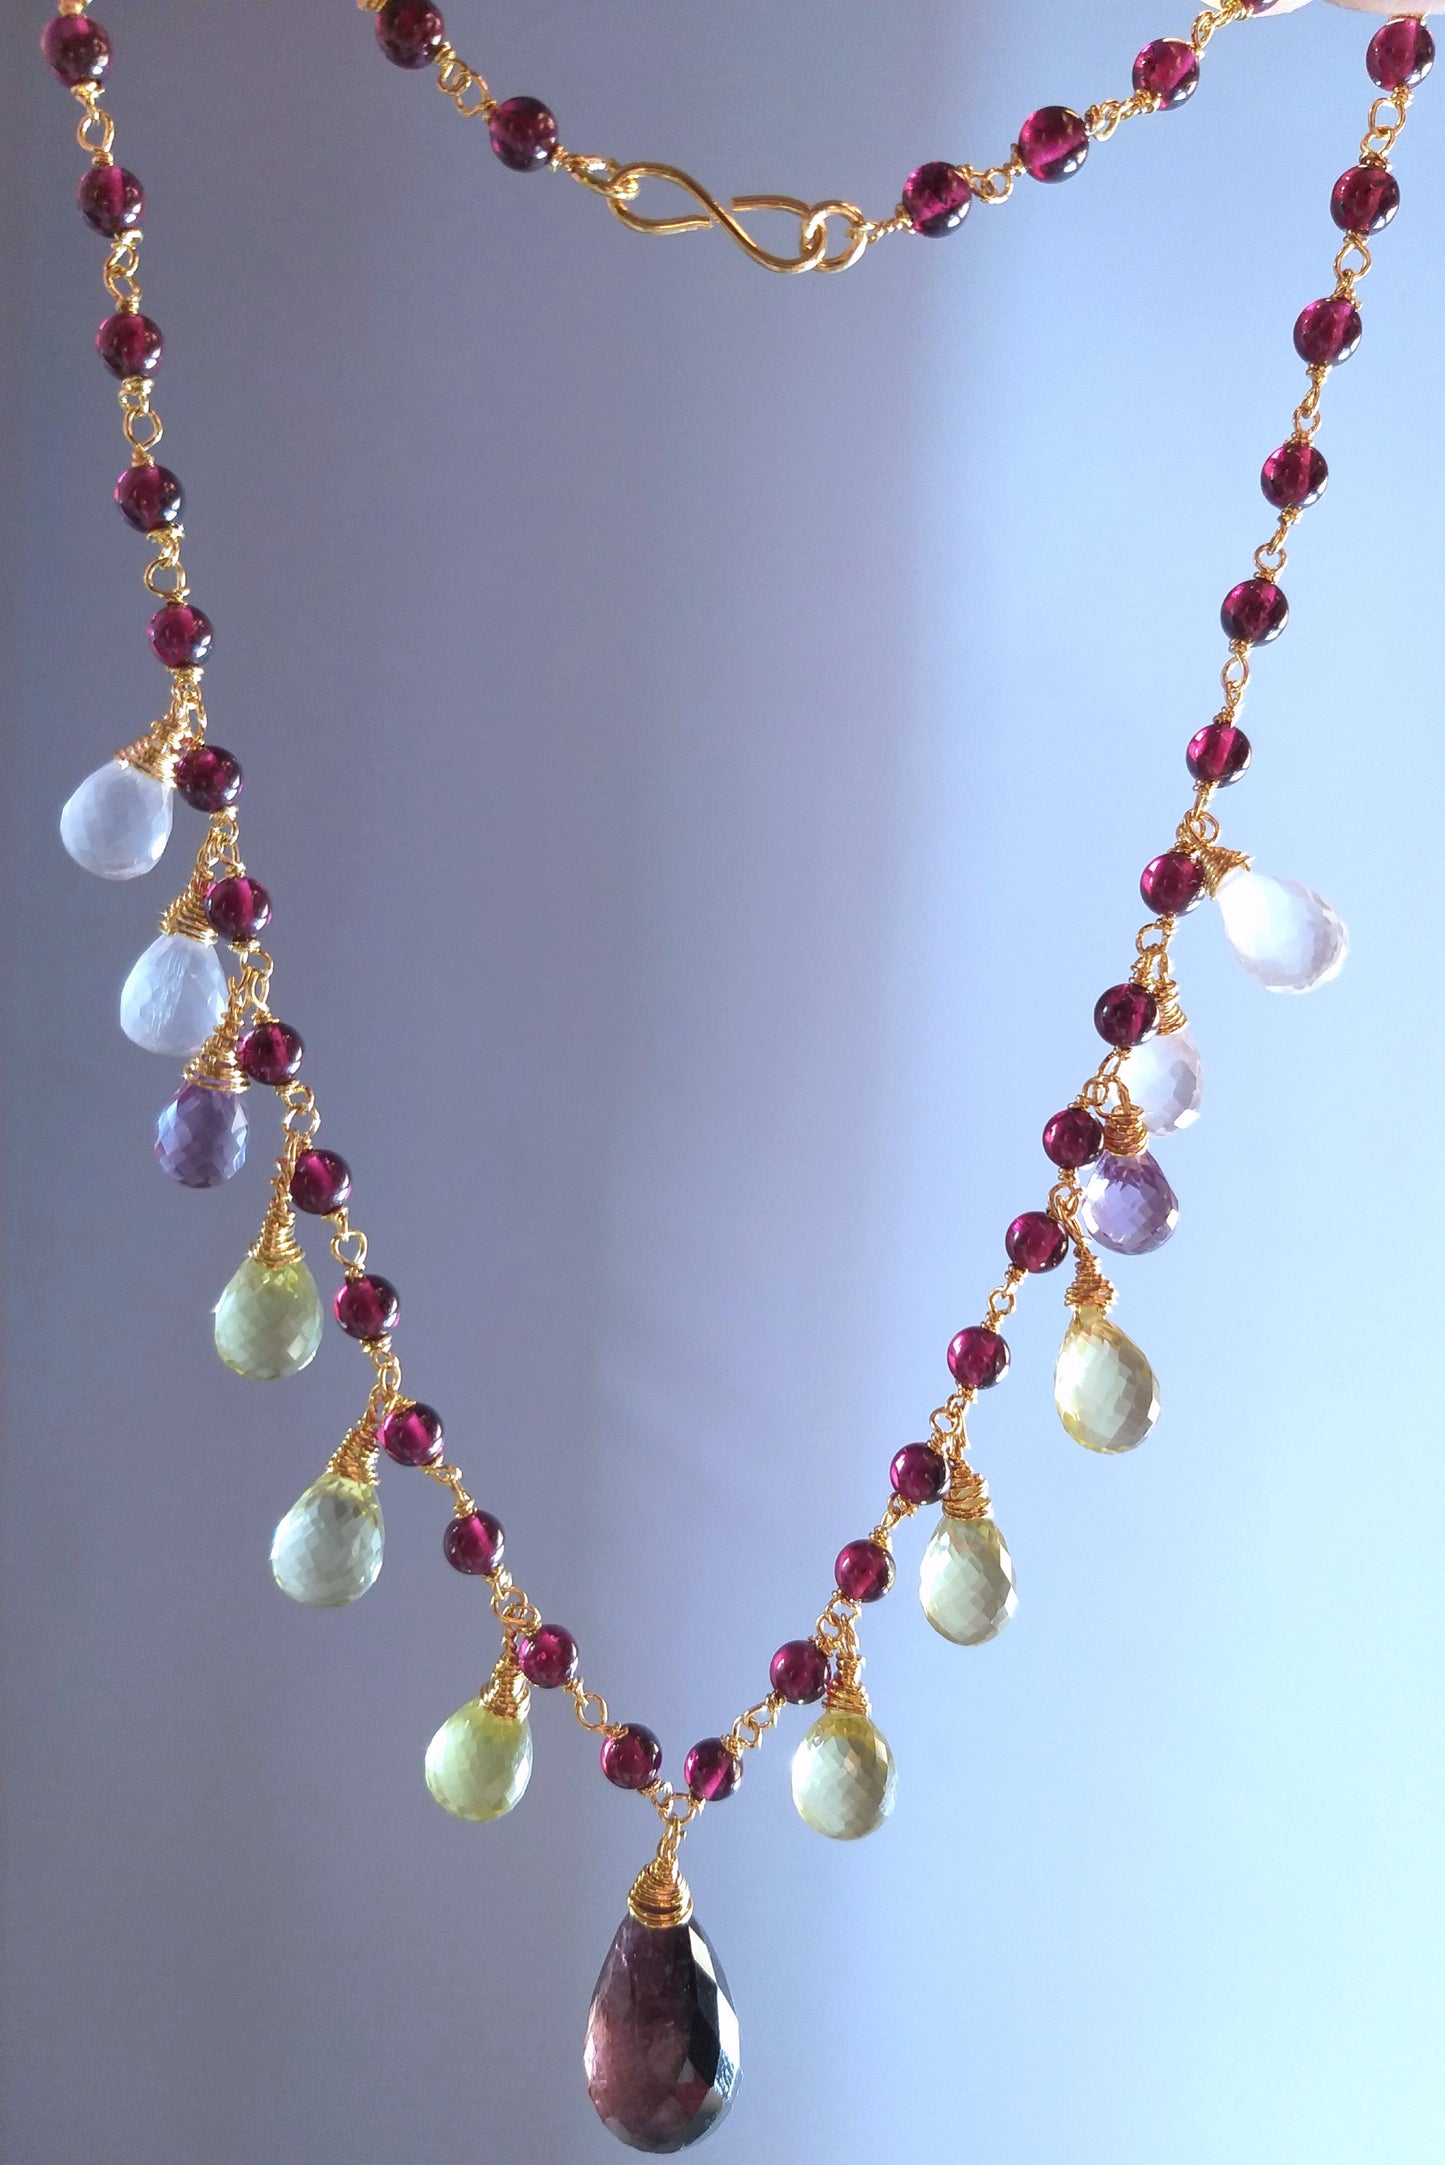 Natural Amethyst, Tourmaline, Quartz and Garnet Necklace and Earrings